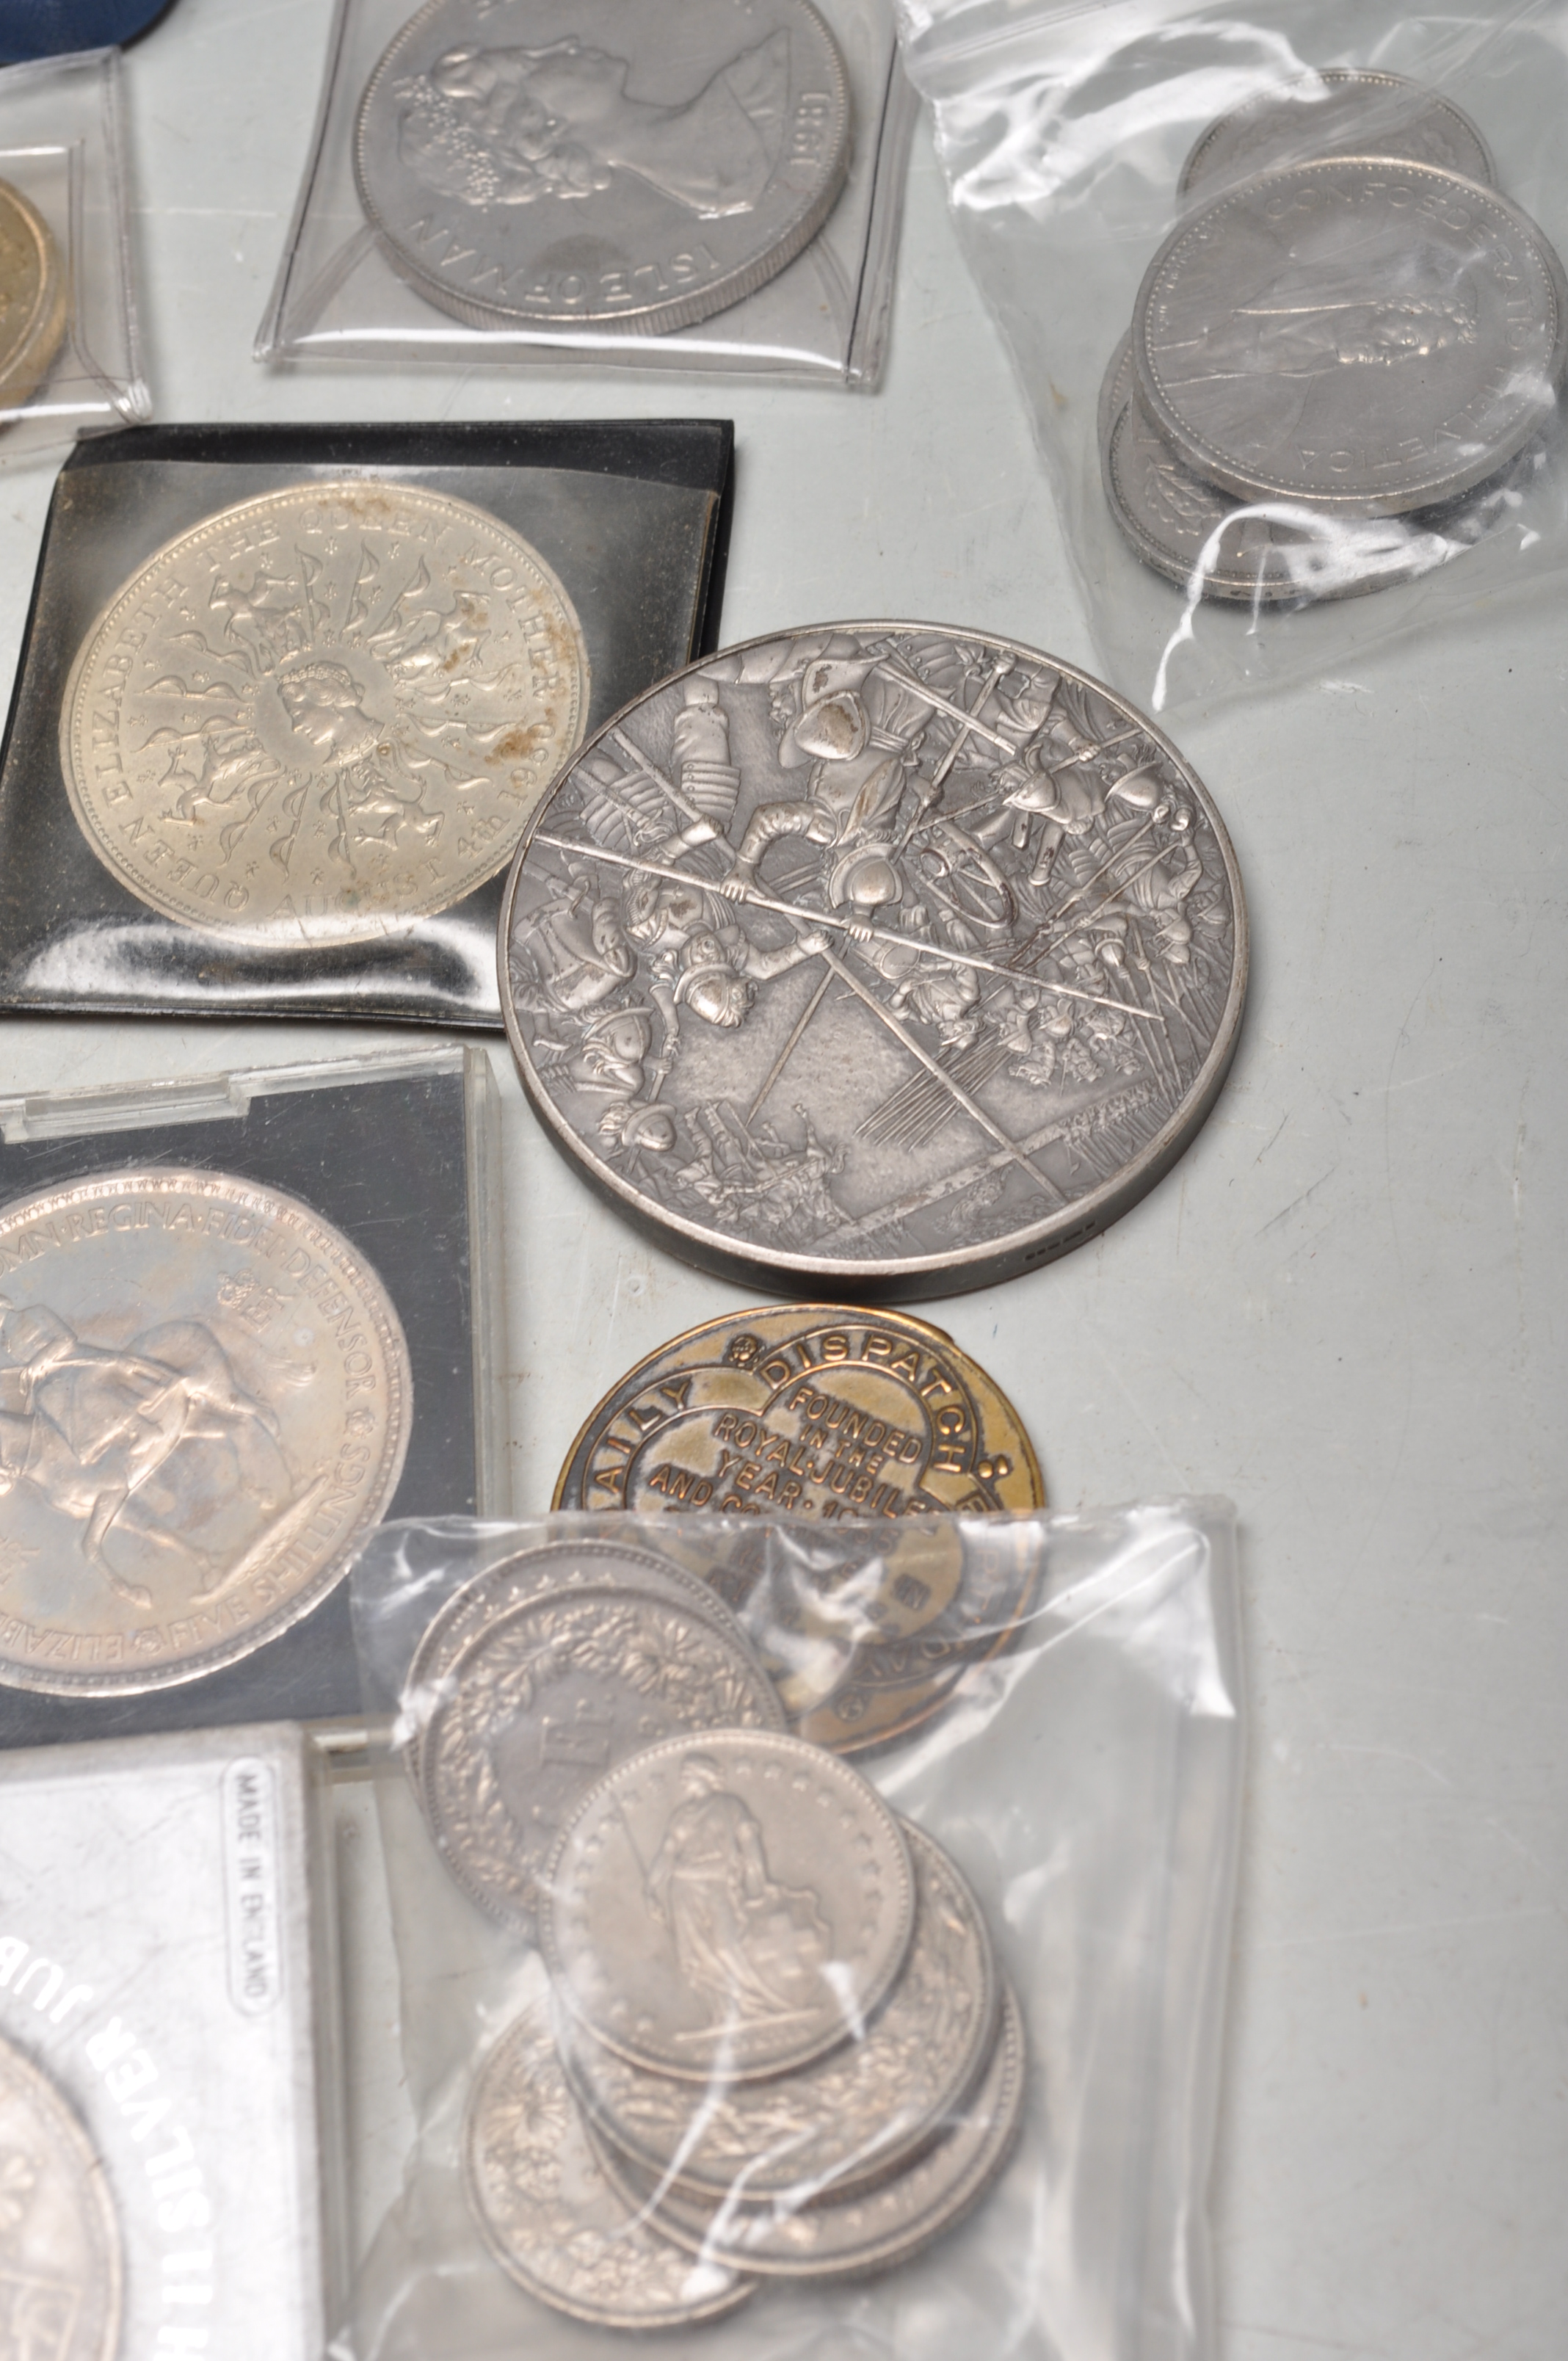 LARGE COLLECTION OF 20TH CENTURY UK CURRENCY AND COMMORATIVE COINS - Image 12 of 14